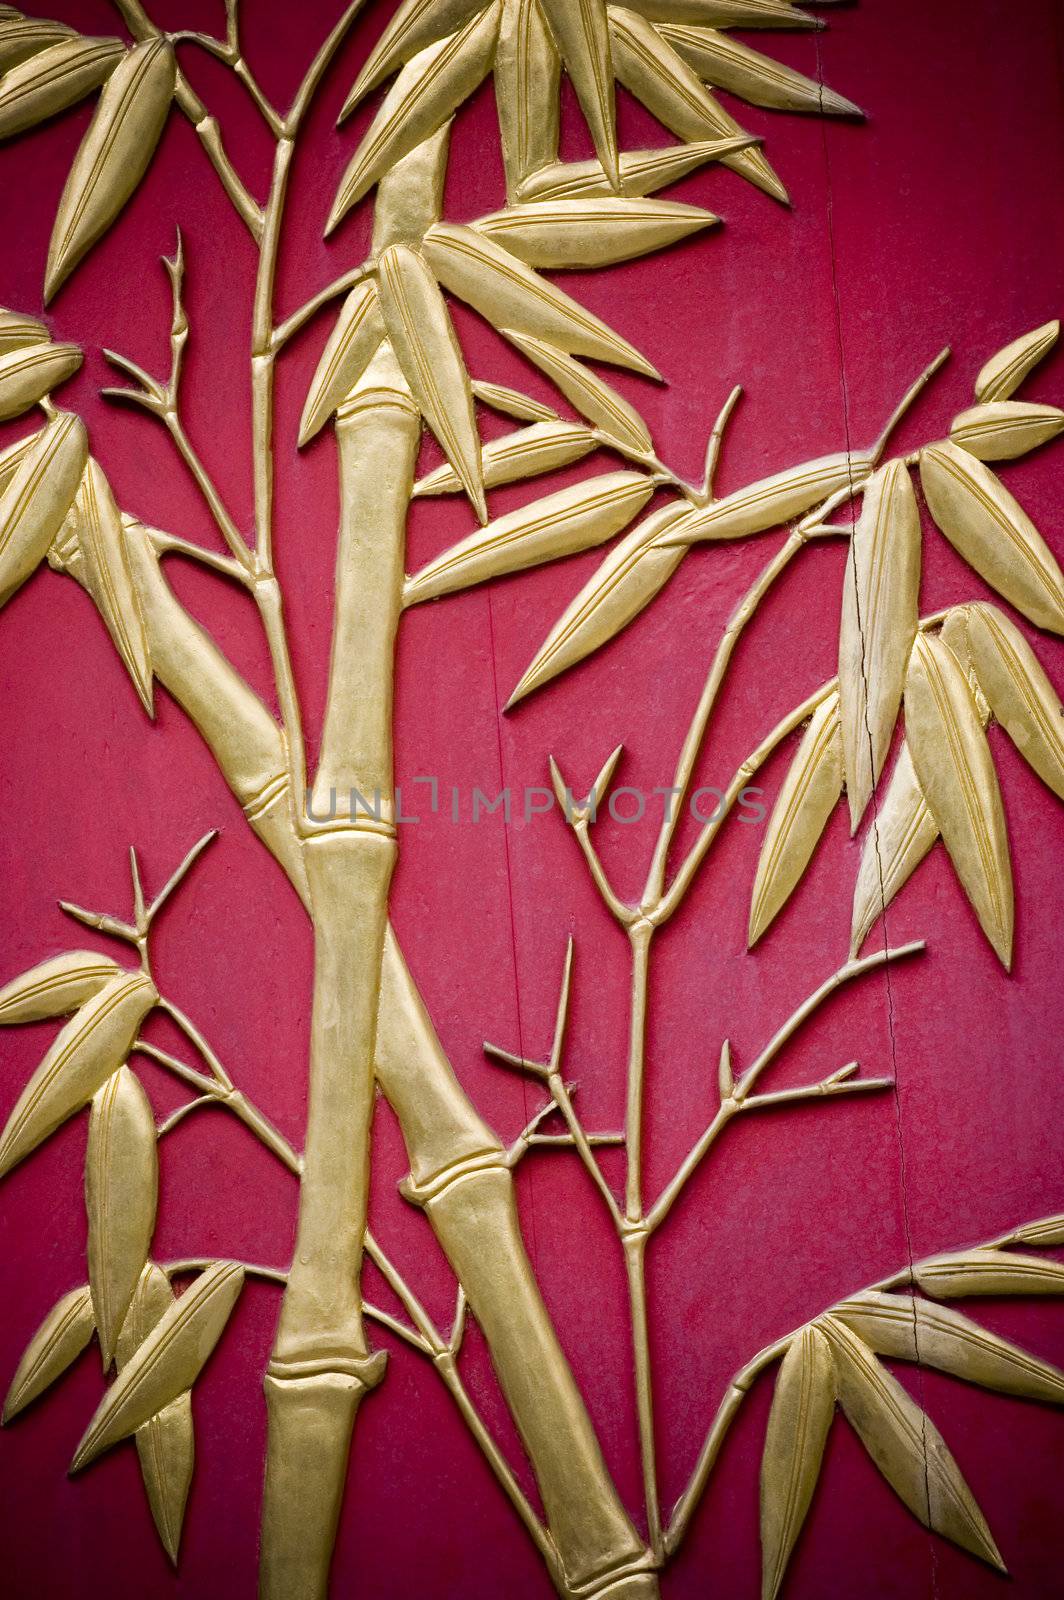 Bamboo carved on door. Symbol of longevity and friendship.
